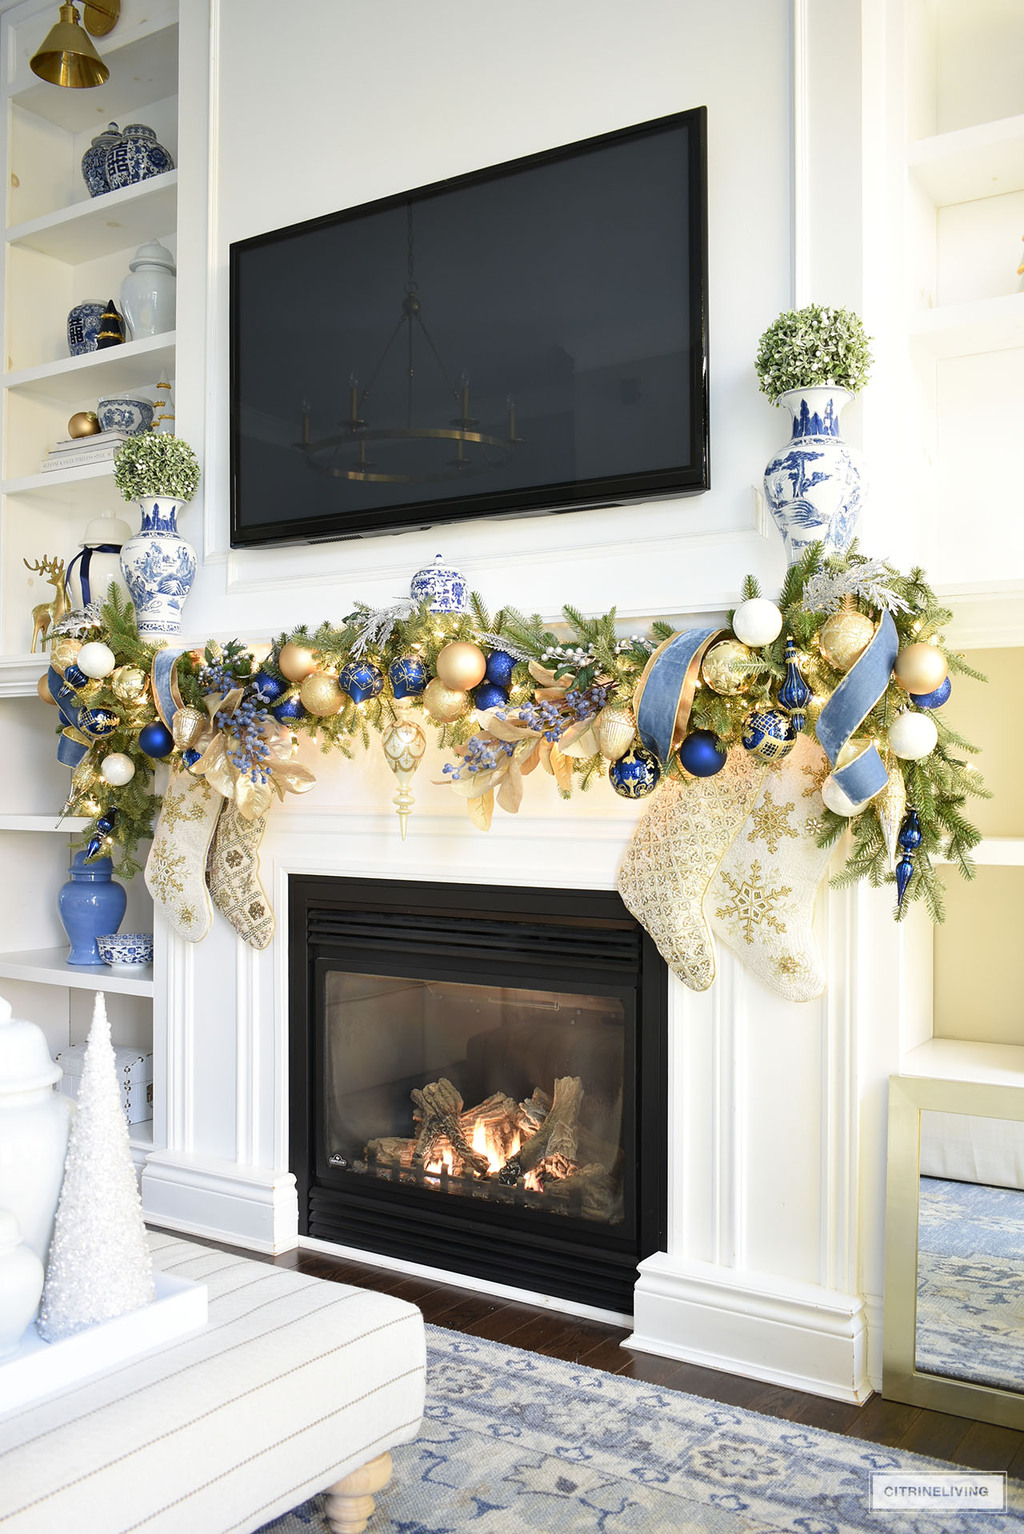 Fireplace decorated with a swagged garland adorned with blue and gold decorations and ribbon for christmas. Blue and white chinoiserie vases with topiaries balls sit above on each end flanking the tv.